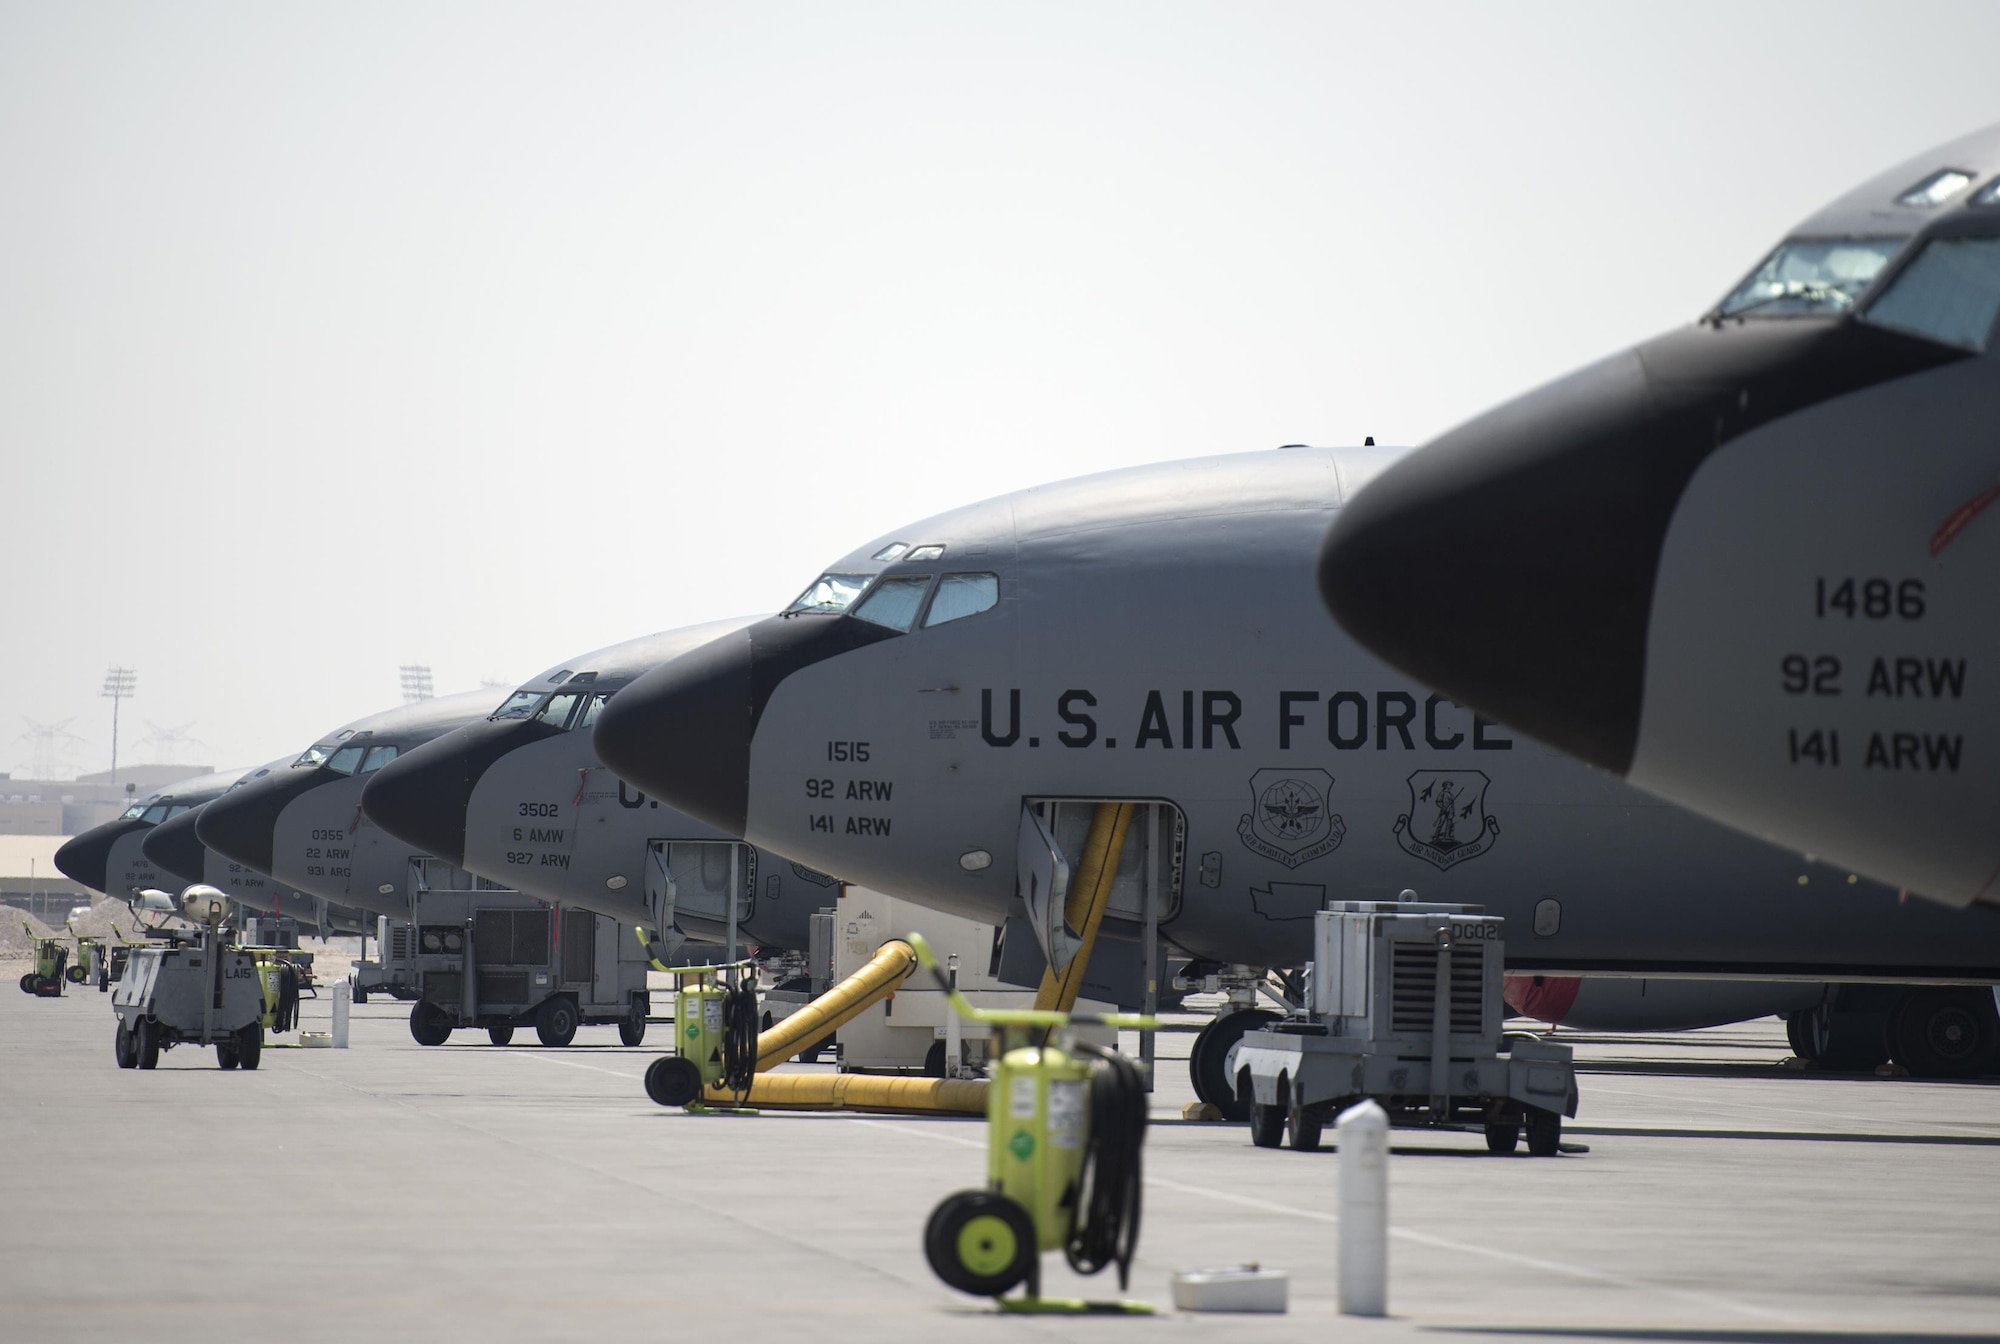 U.S. Air Force KC-135 Stratotankers sit on the ramp at Al Udeid Air Base, Qatar, June 30, 2017. The KC-135 Stratotanker provides aerial refueling support to U.S. and coalition aircraft 24/7 throughout the U.S. Central Command area of responsibility. (U.S. Air Force photo by Tech. Sgt. Amy M. Lovgren)